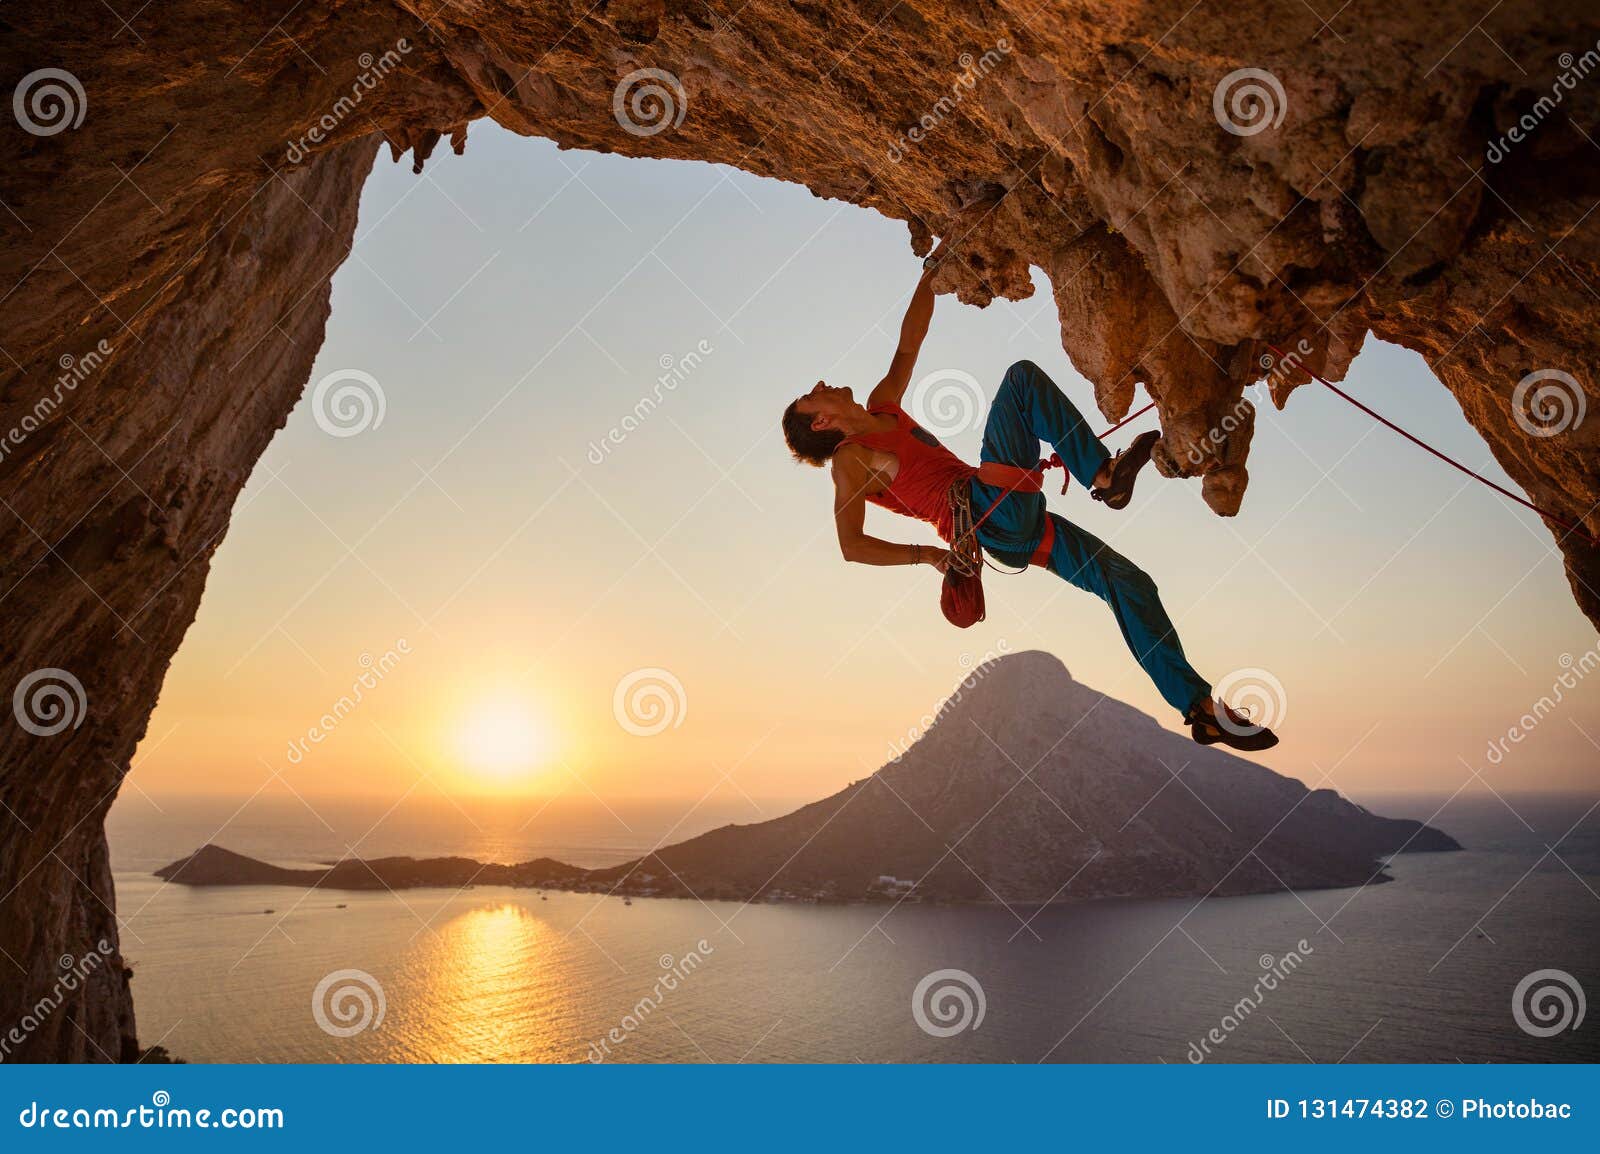 male rock climber hanging with one hand on challenging route on cliff